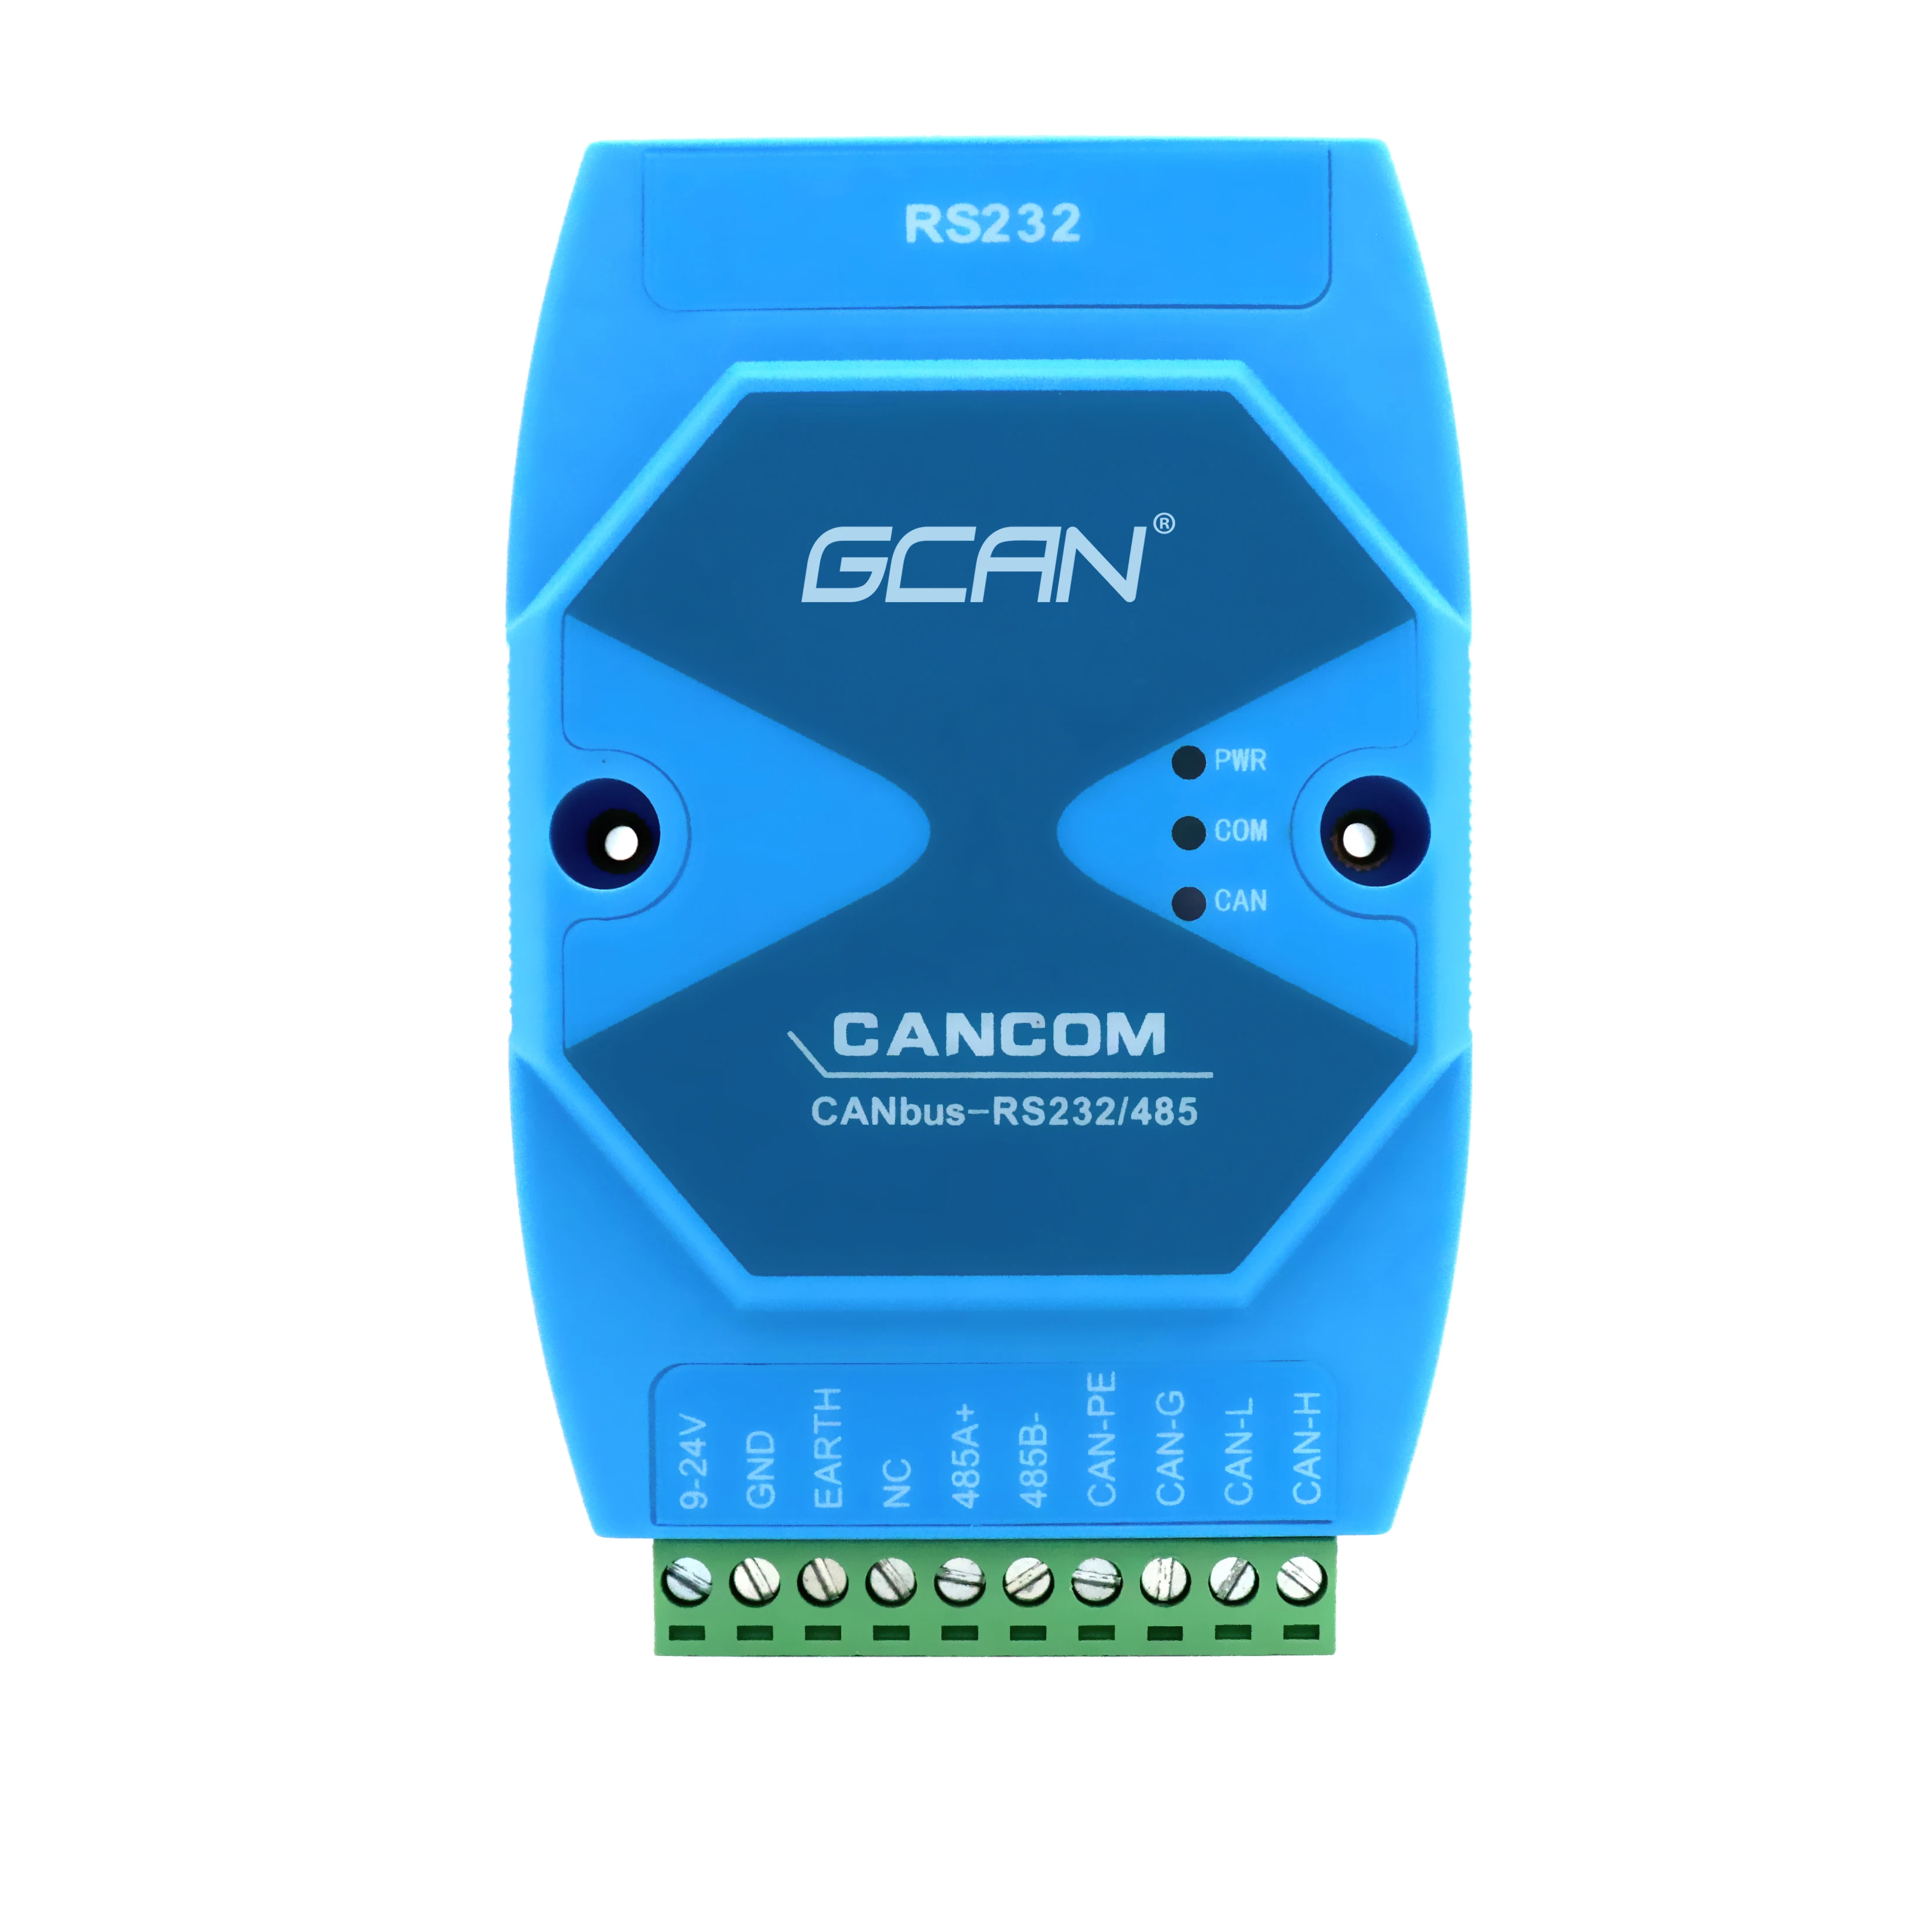 GCAN-207 Bidirectional Communication Between Rs232 Or Rs485 Bus And Can Bus Realize Real-Time Data Conversion